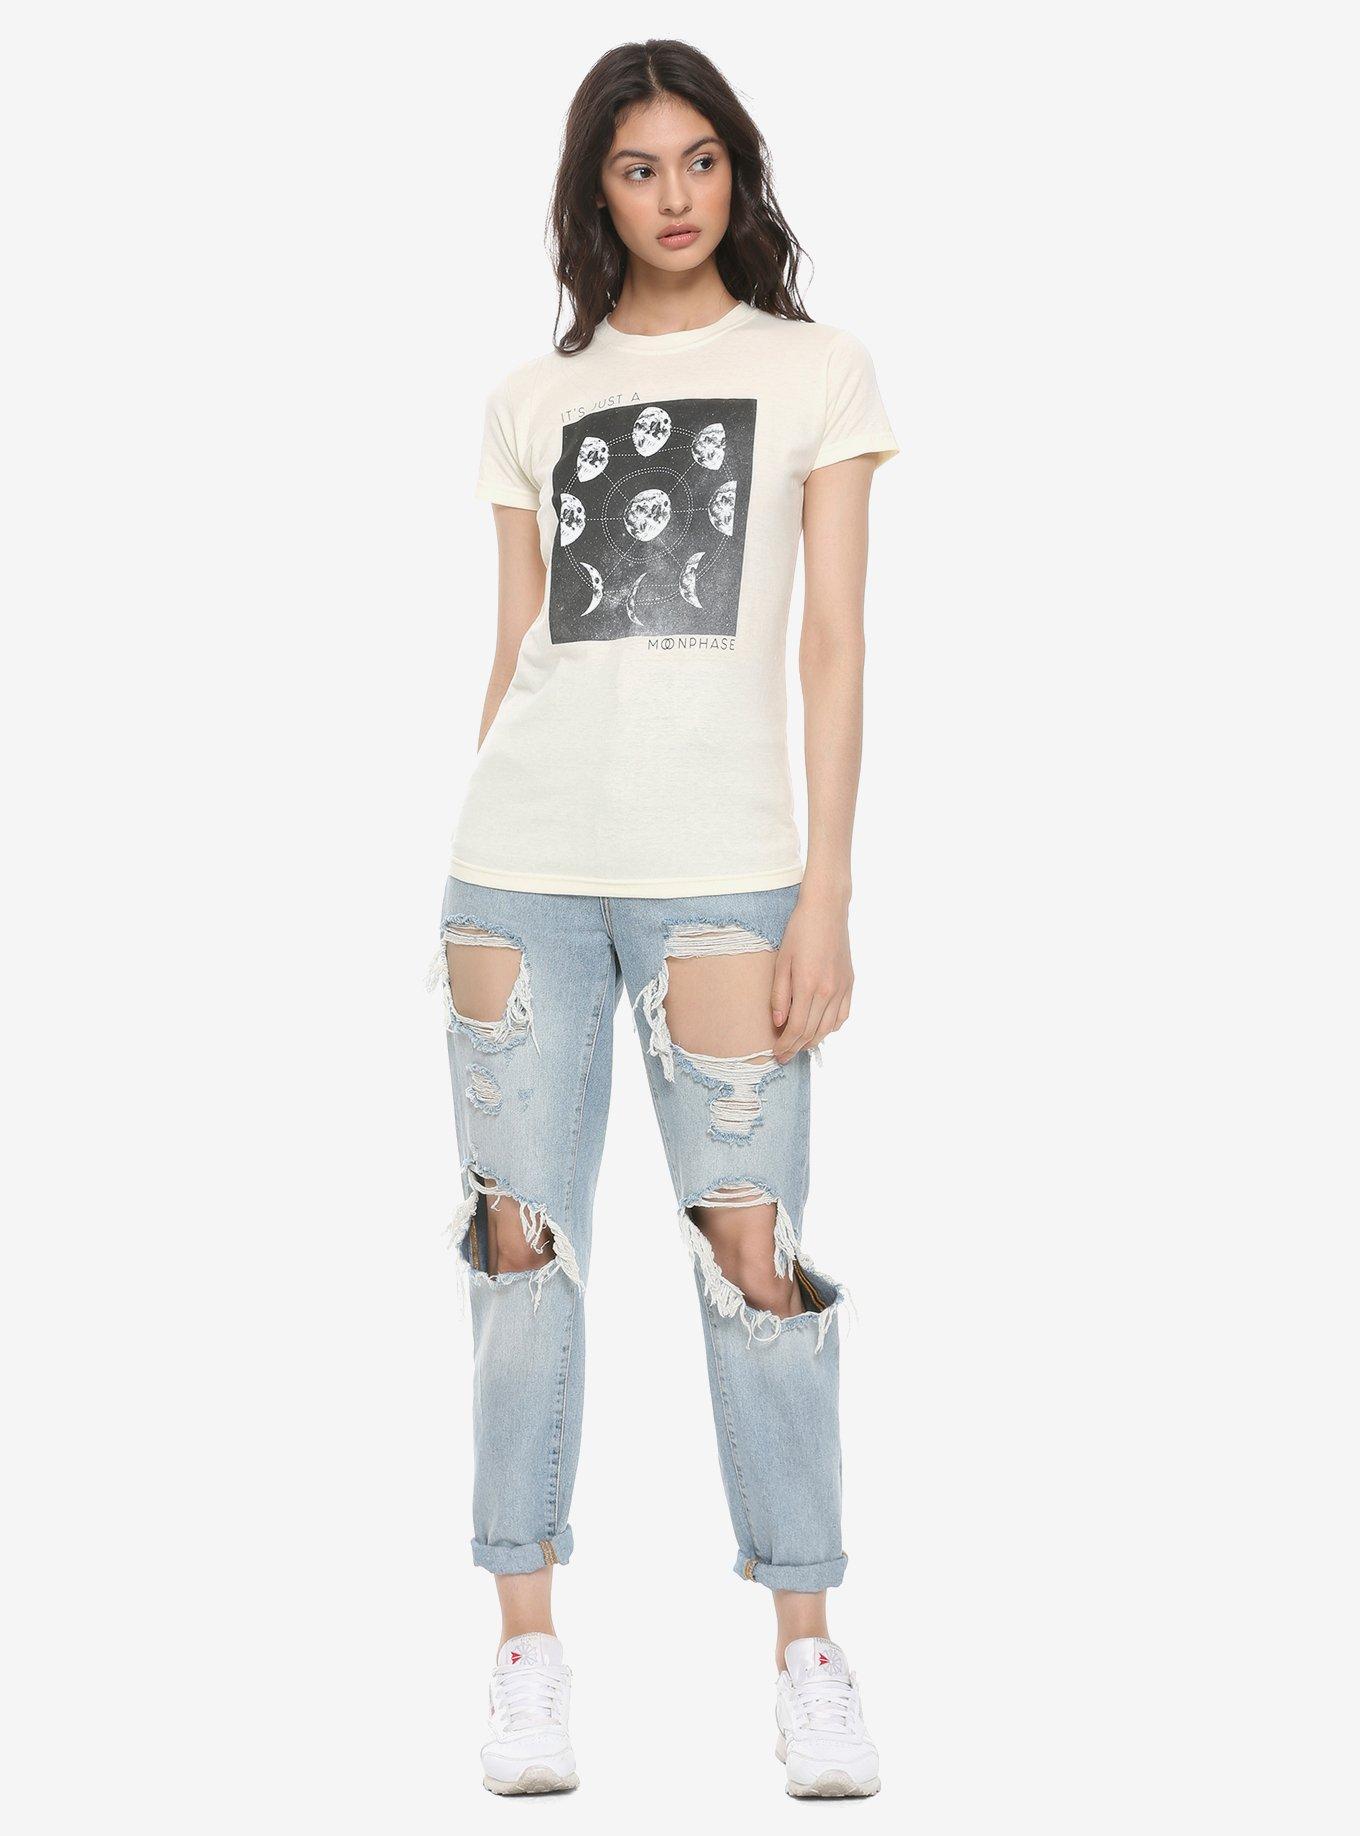 Just A Moon Phase Girls T-Shirt, , alternate